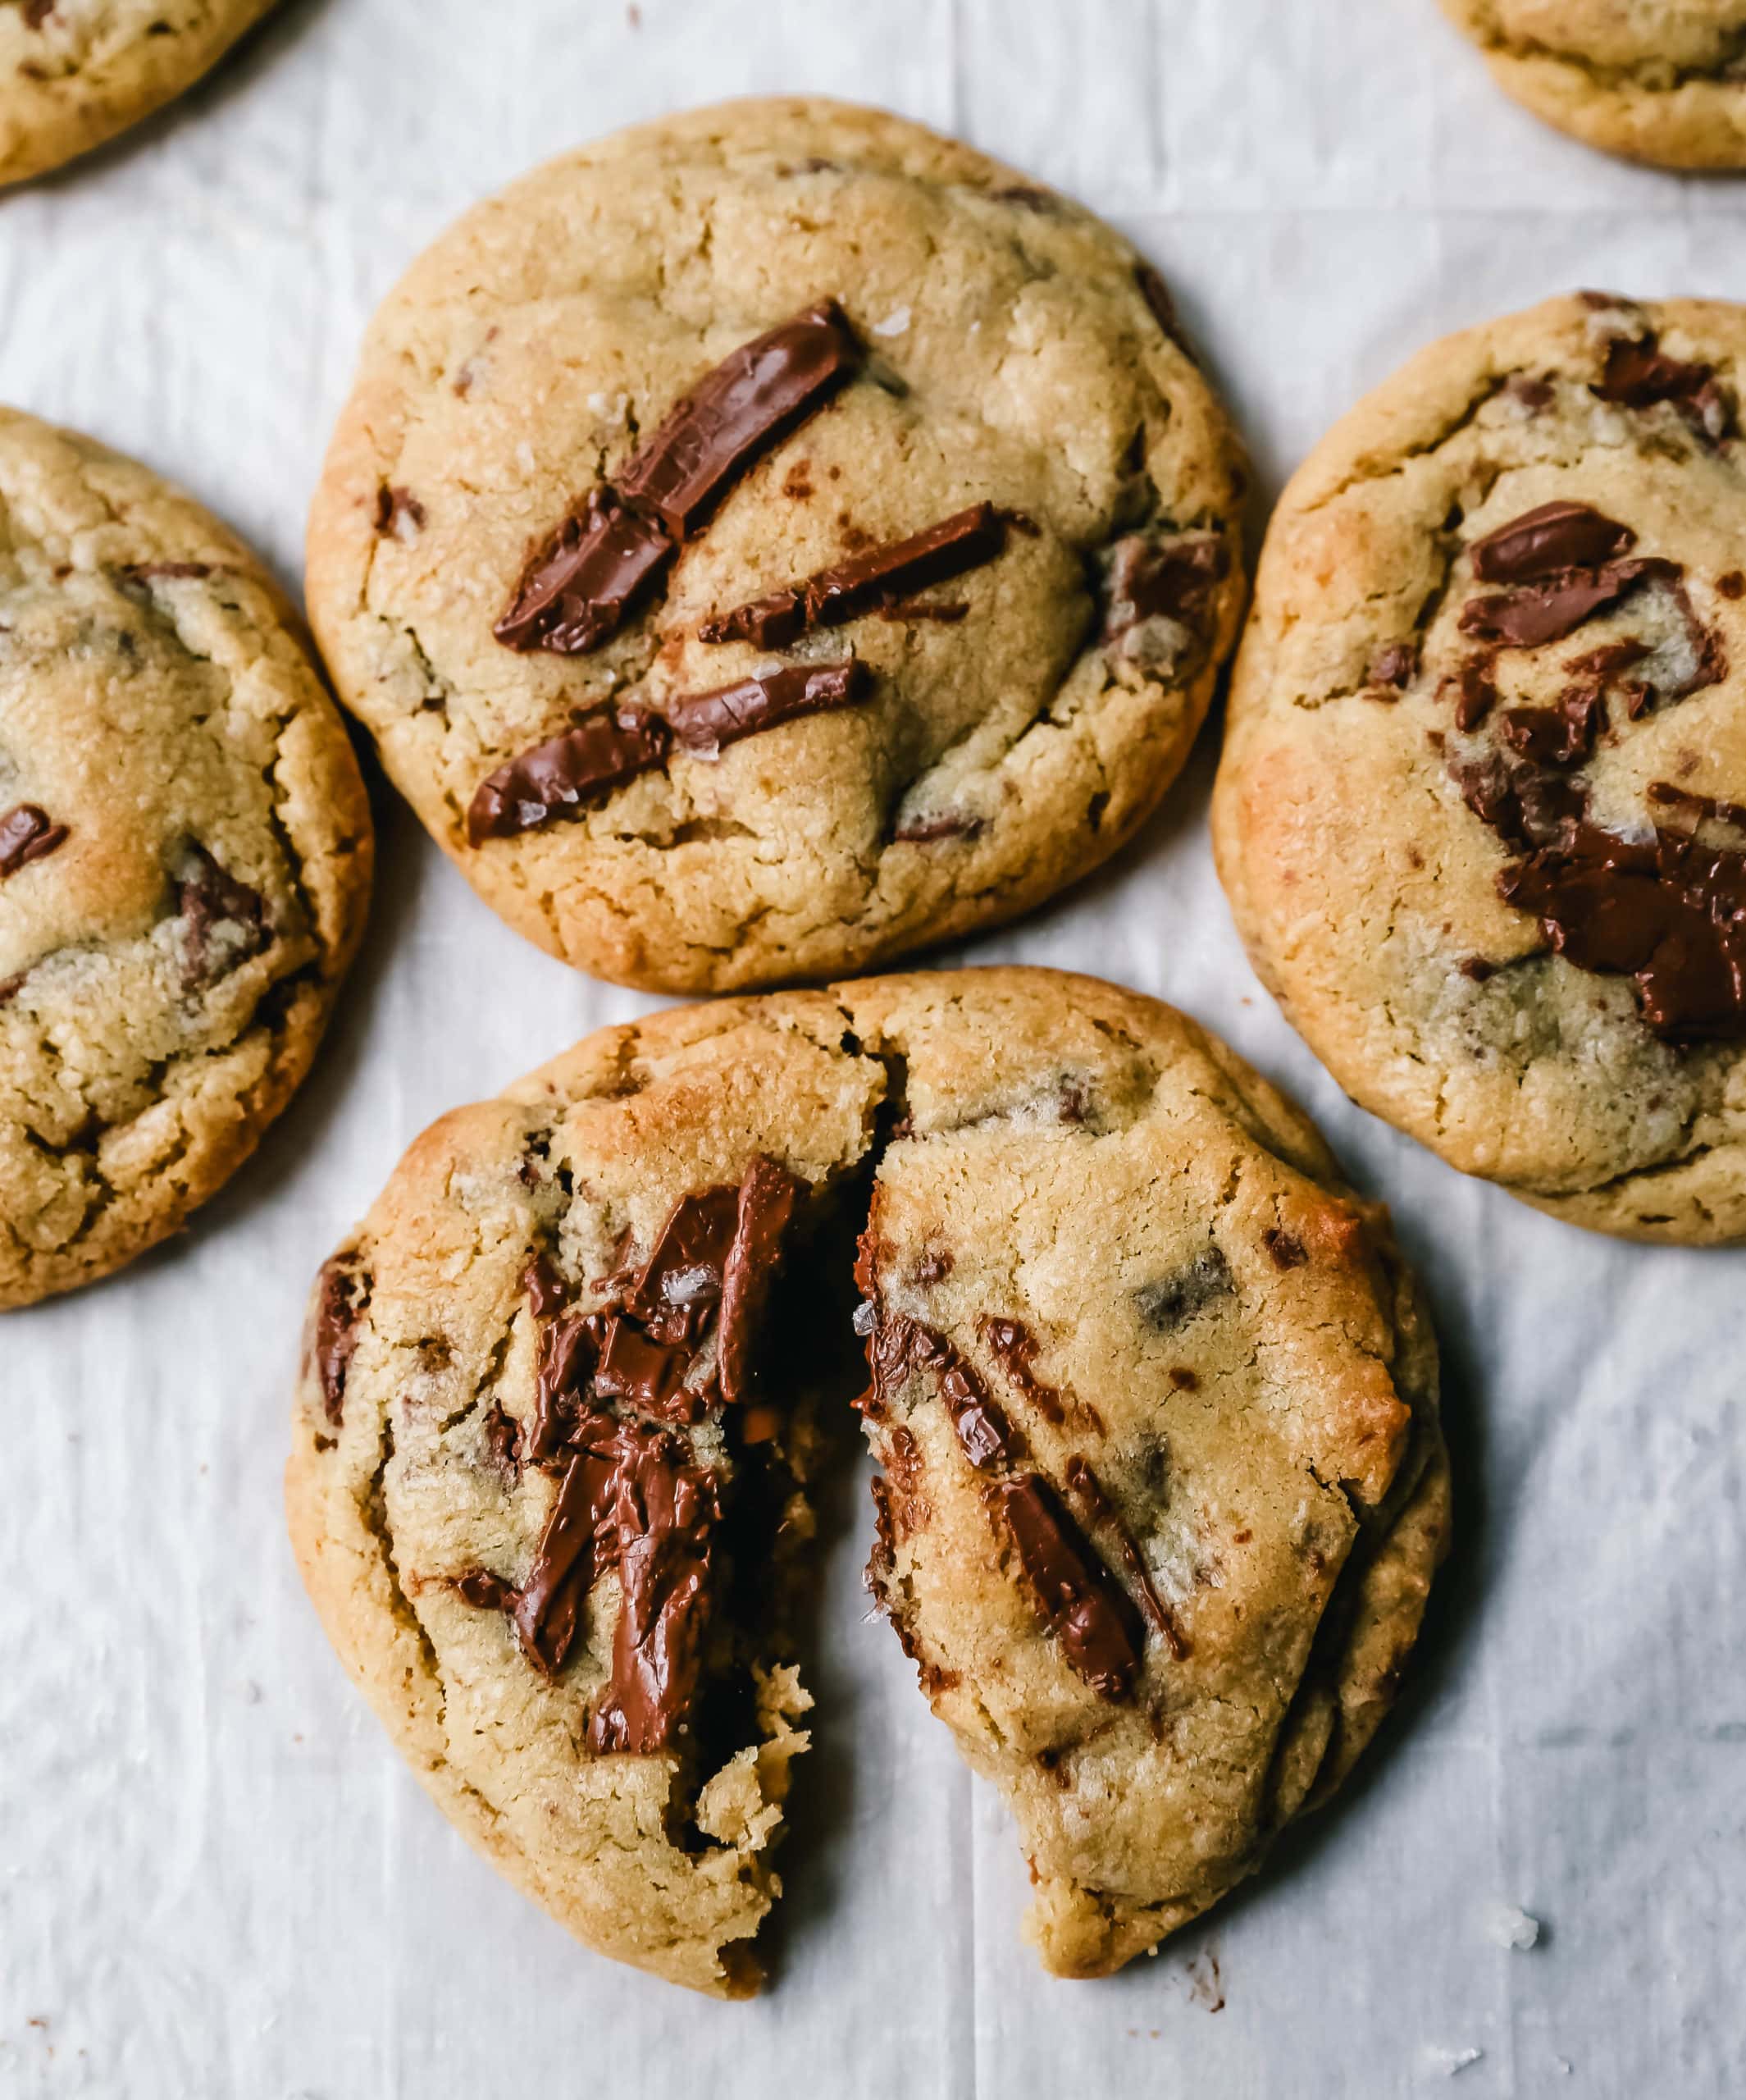 Classic Chocolate Chip Cookies A classic soft, chewy, chocolate chip cookie recipe. This is such a popular chocolate chip cookie recipe!